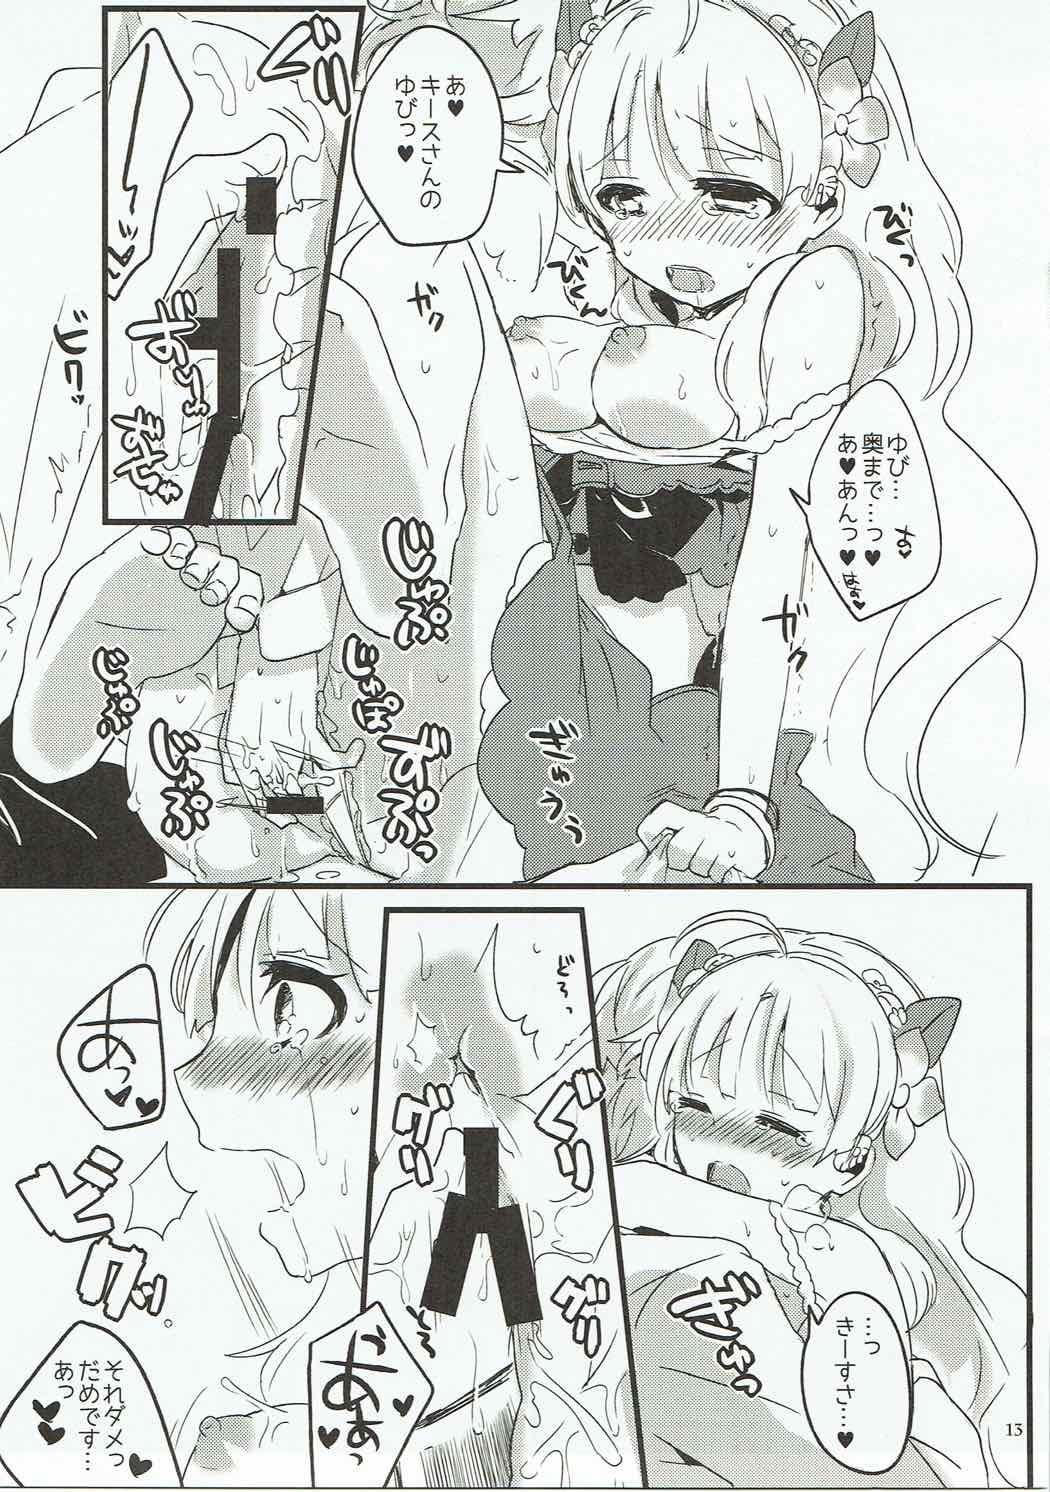 Shoplifter Inter Night Over Work - Atelier ayesha Blow - Page 12